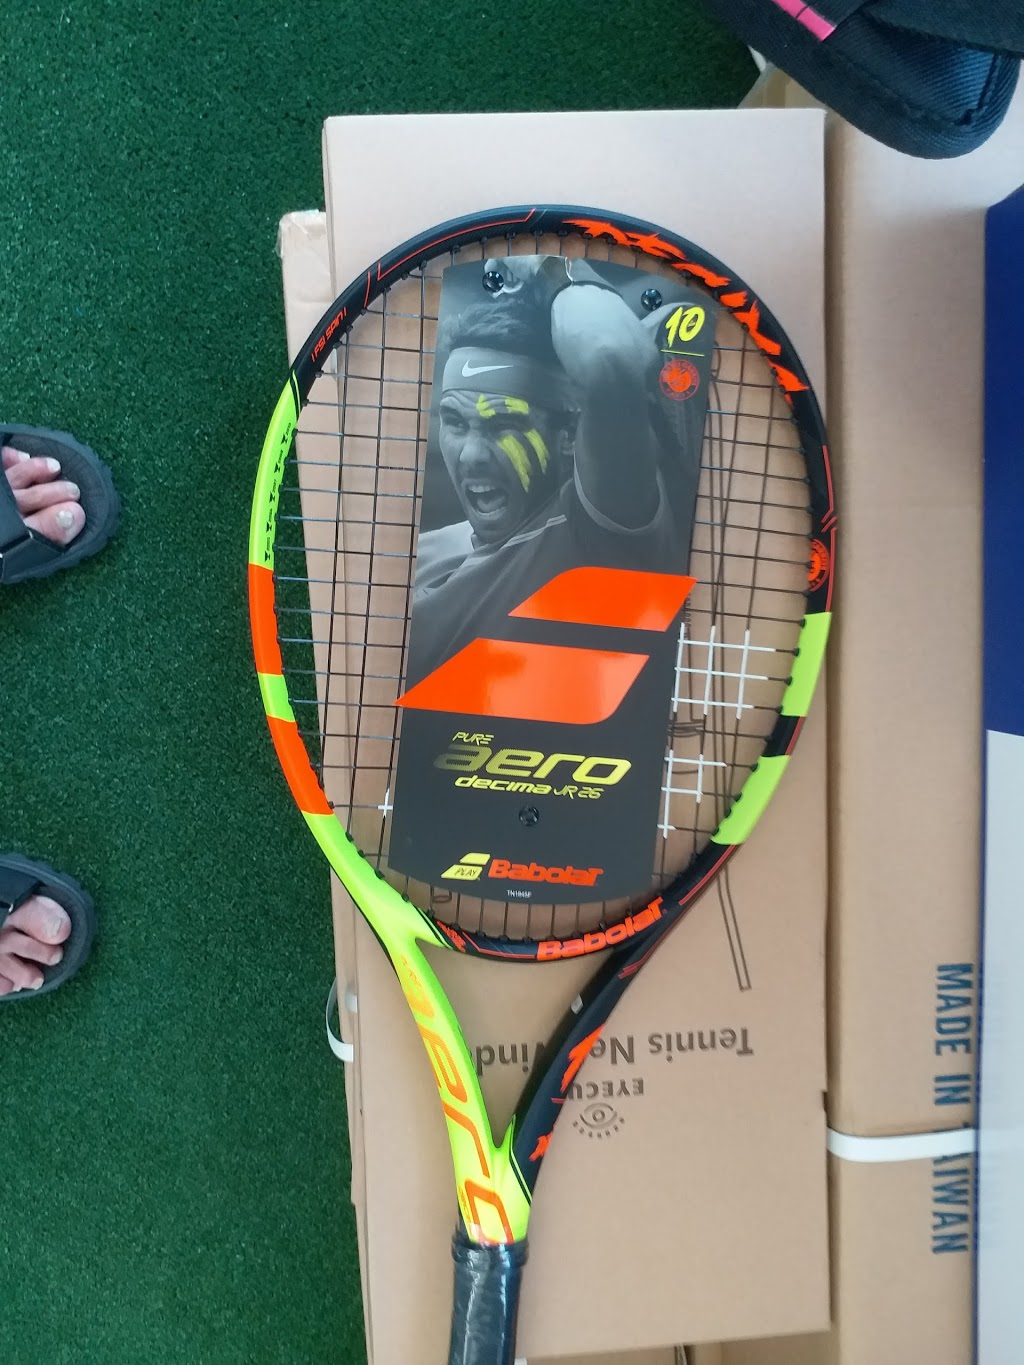 Top Serve Tennis | store | 141 Victoria Ave, Chatswood NSW 2067, Australia | 0298822823 OR +61 2 9882 2823